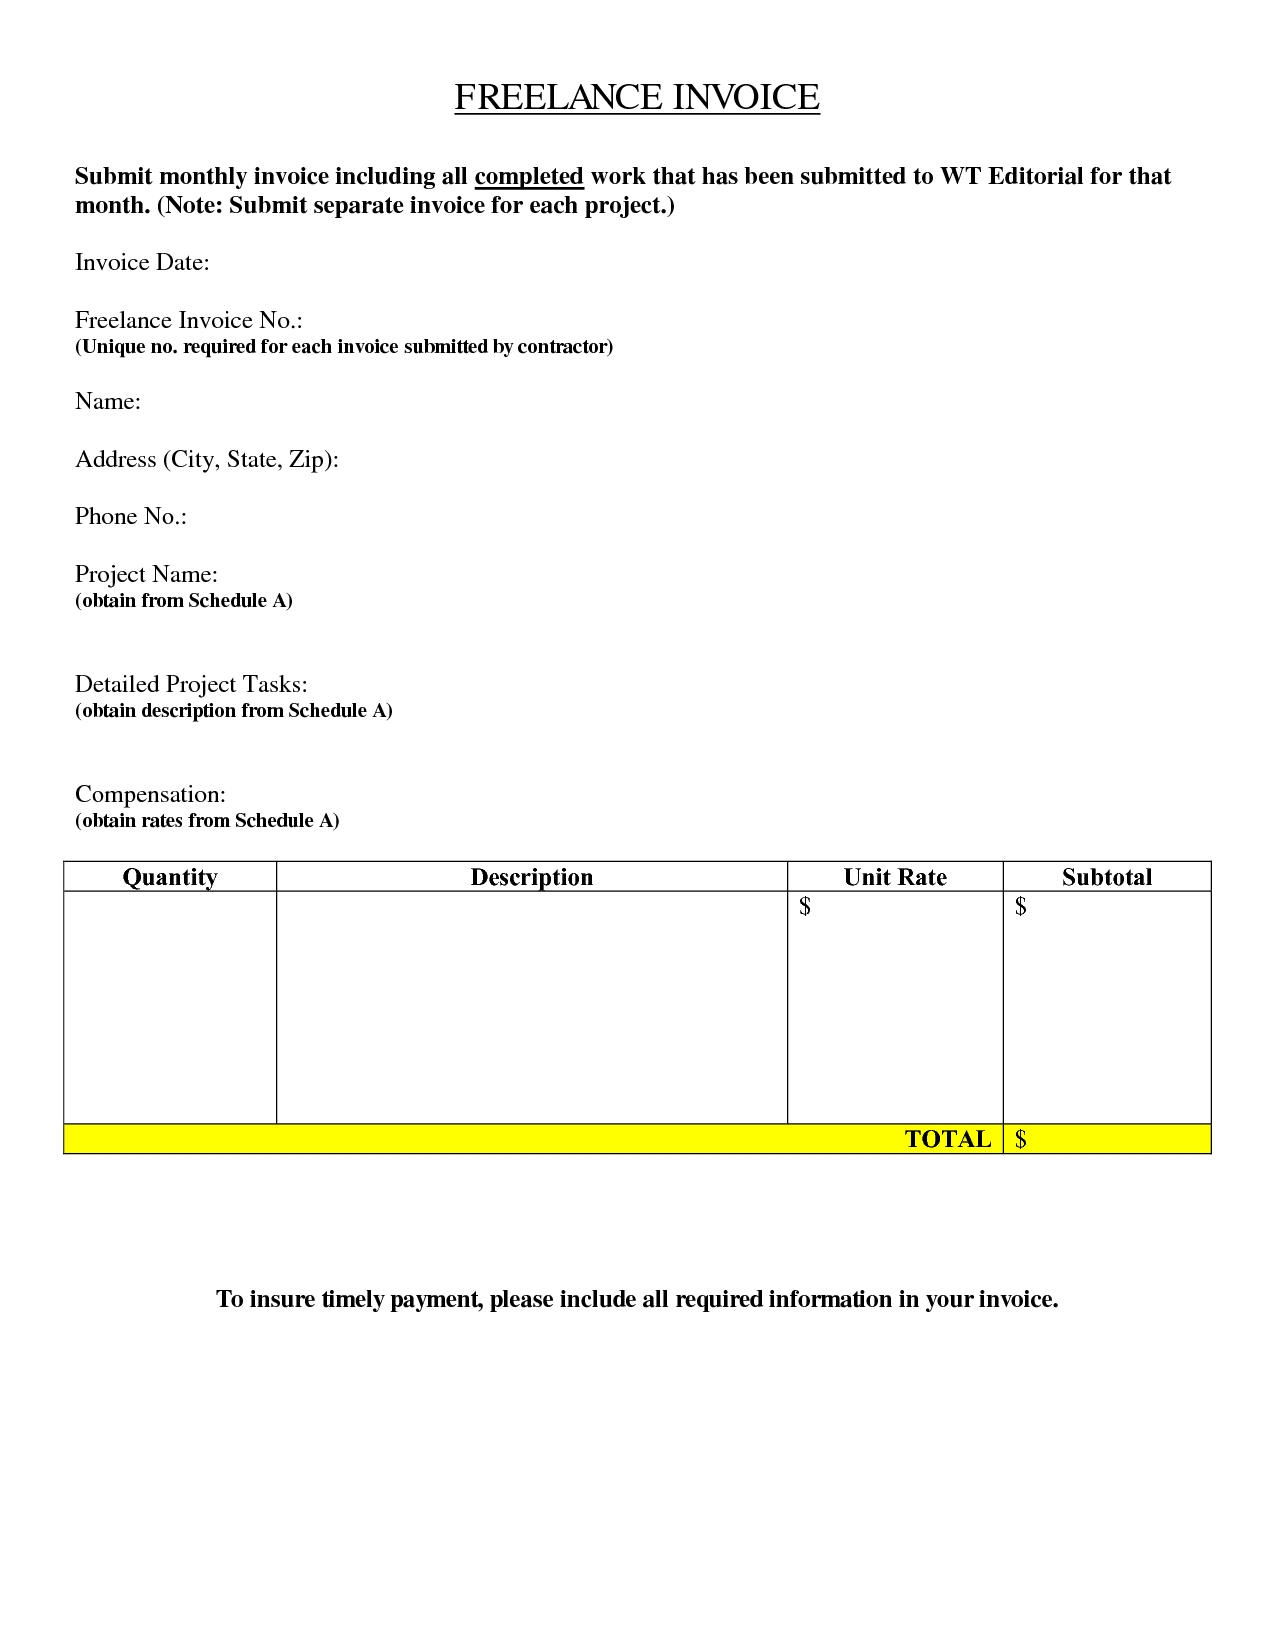 freelance writer invoice template counseldynu invoice template for freelance work